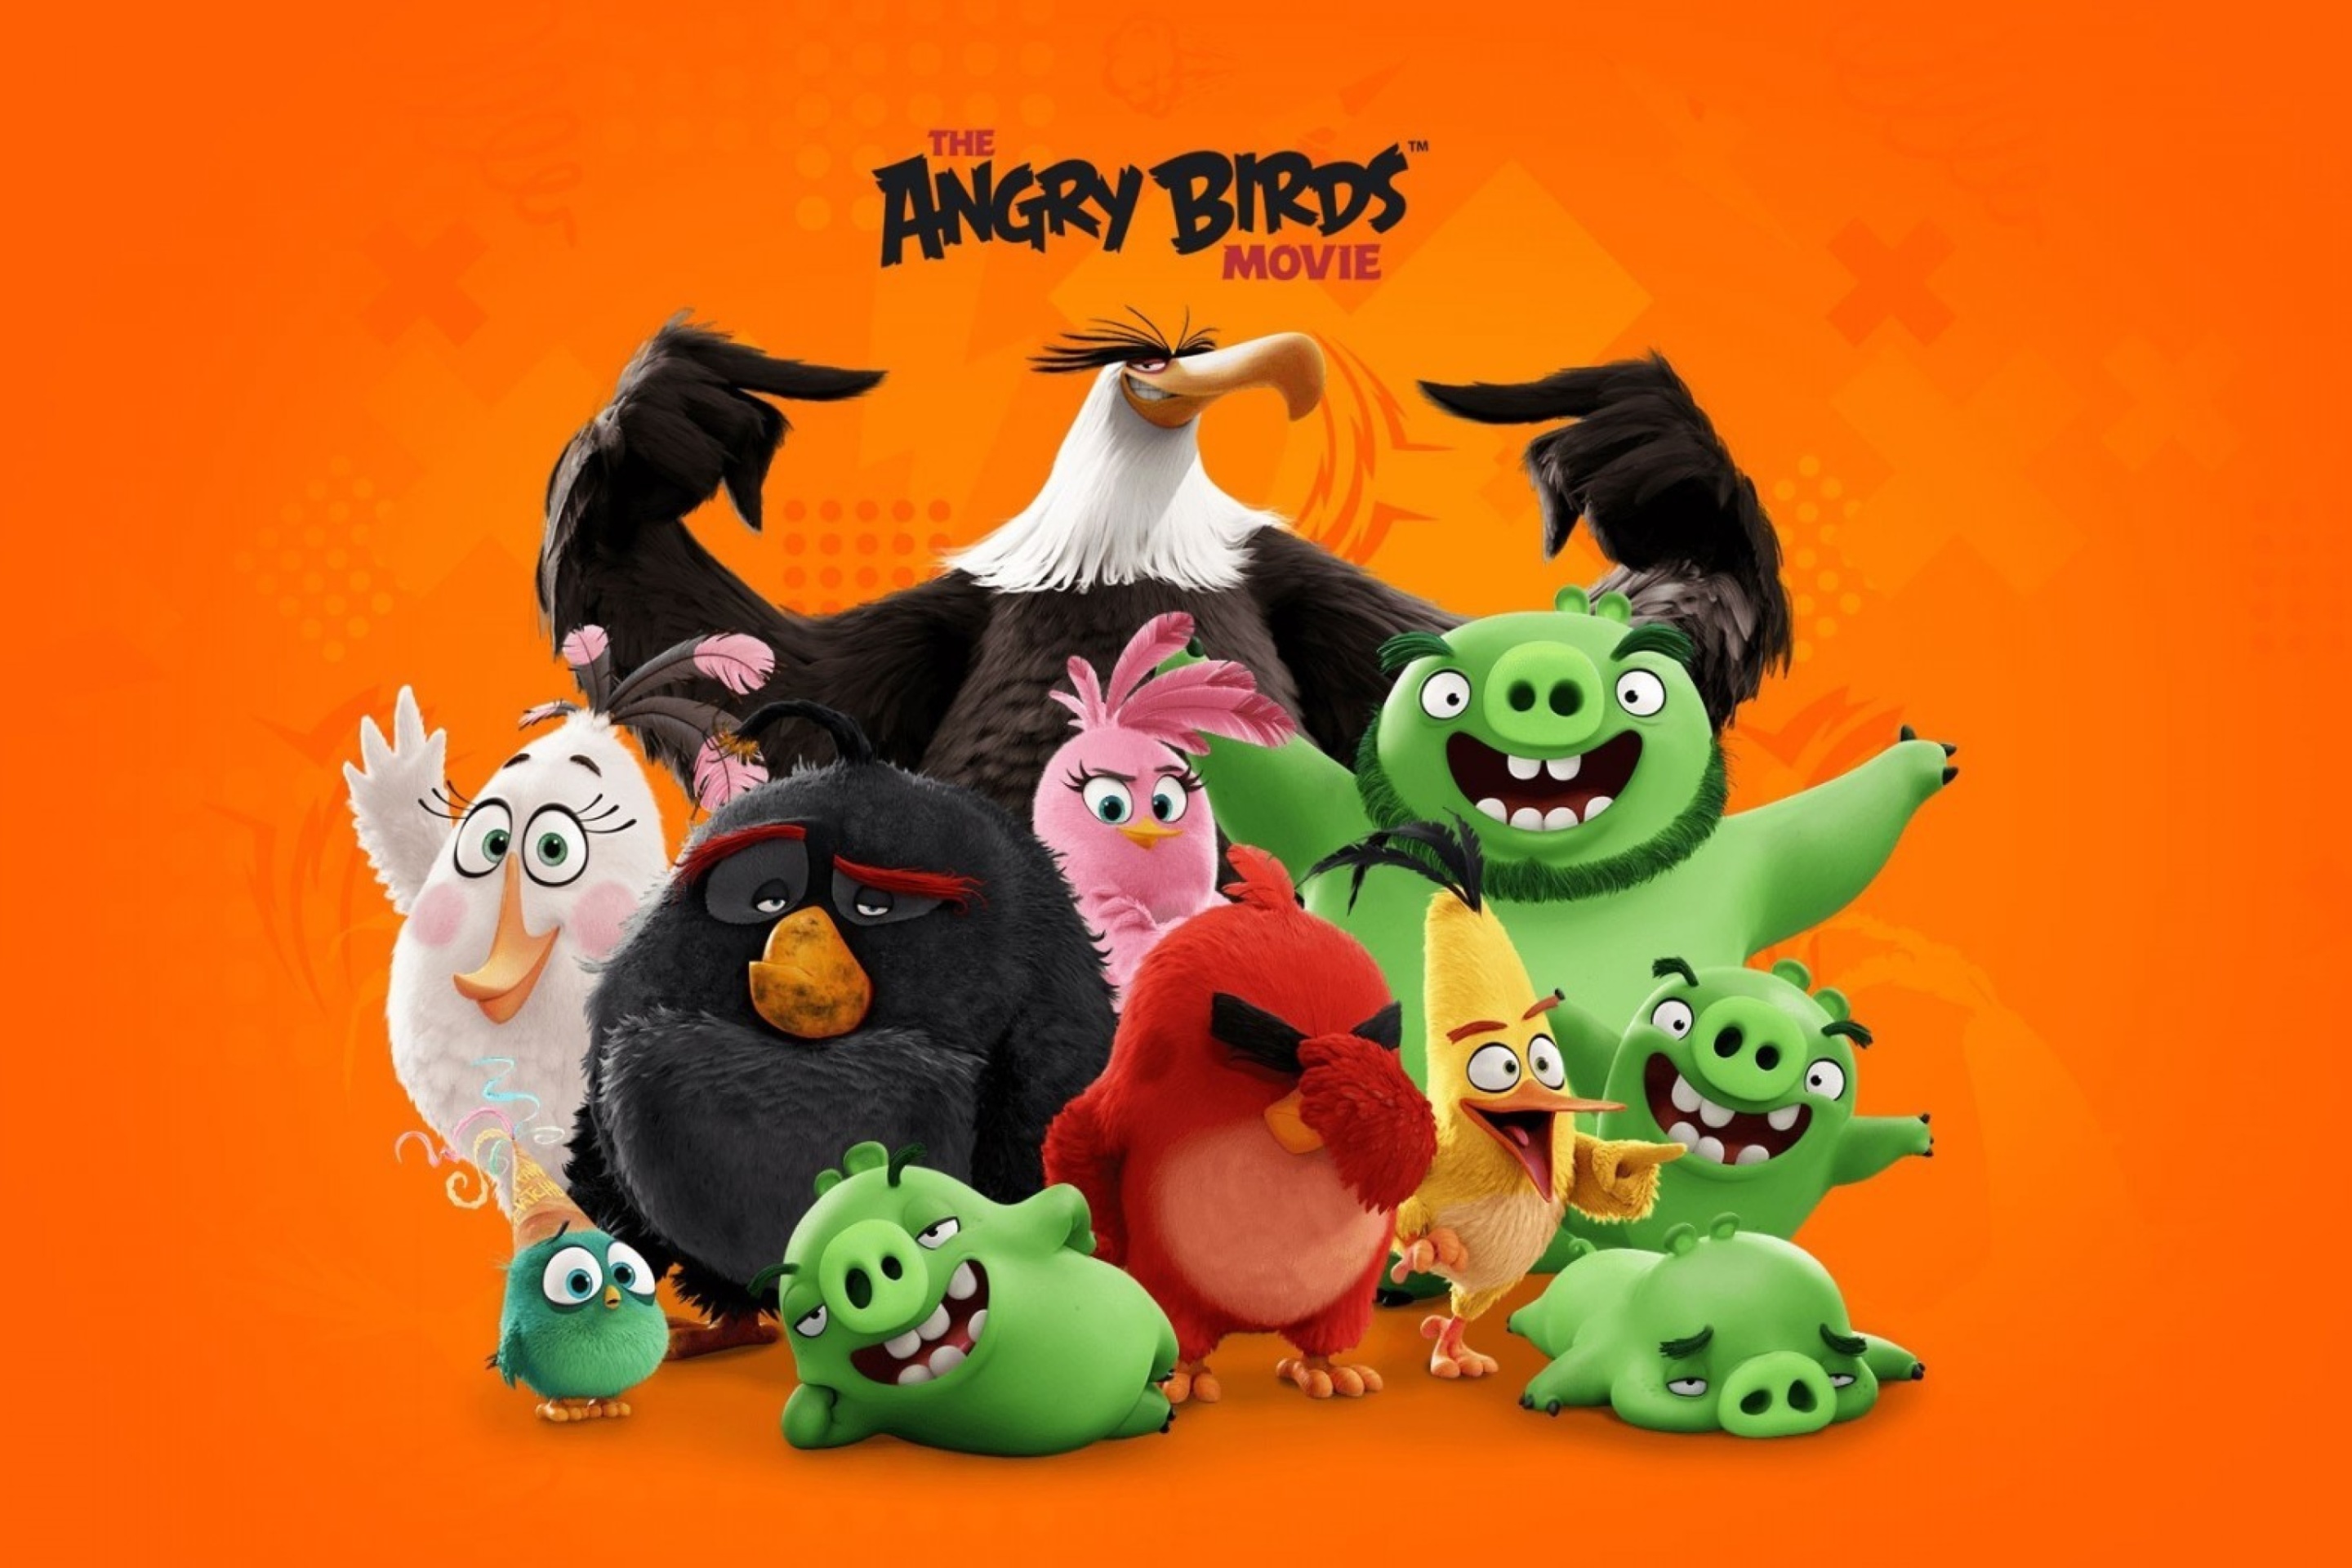 Das Angry Birds the Movie Release by Rovio Wallpaper 2880x1920